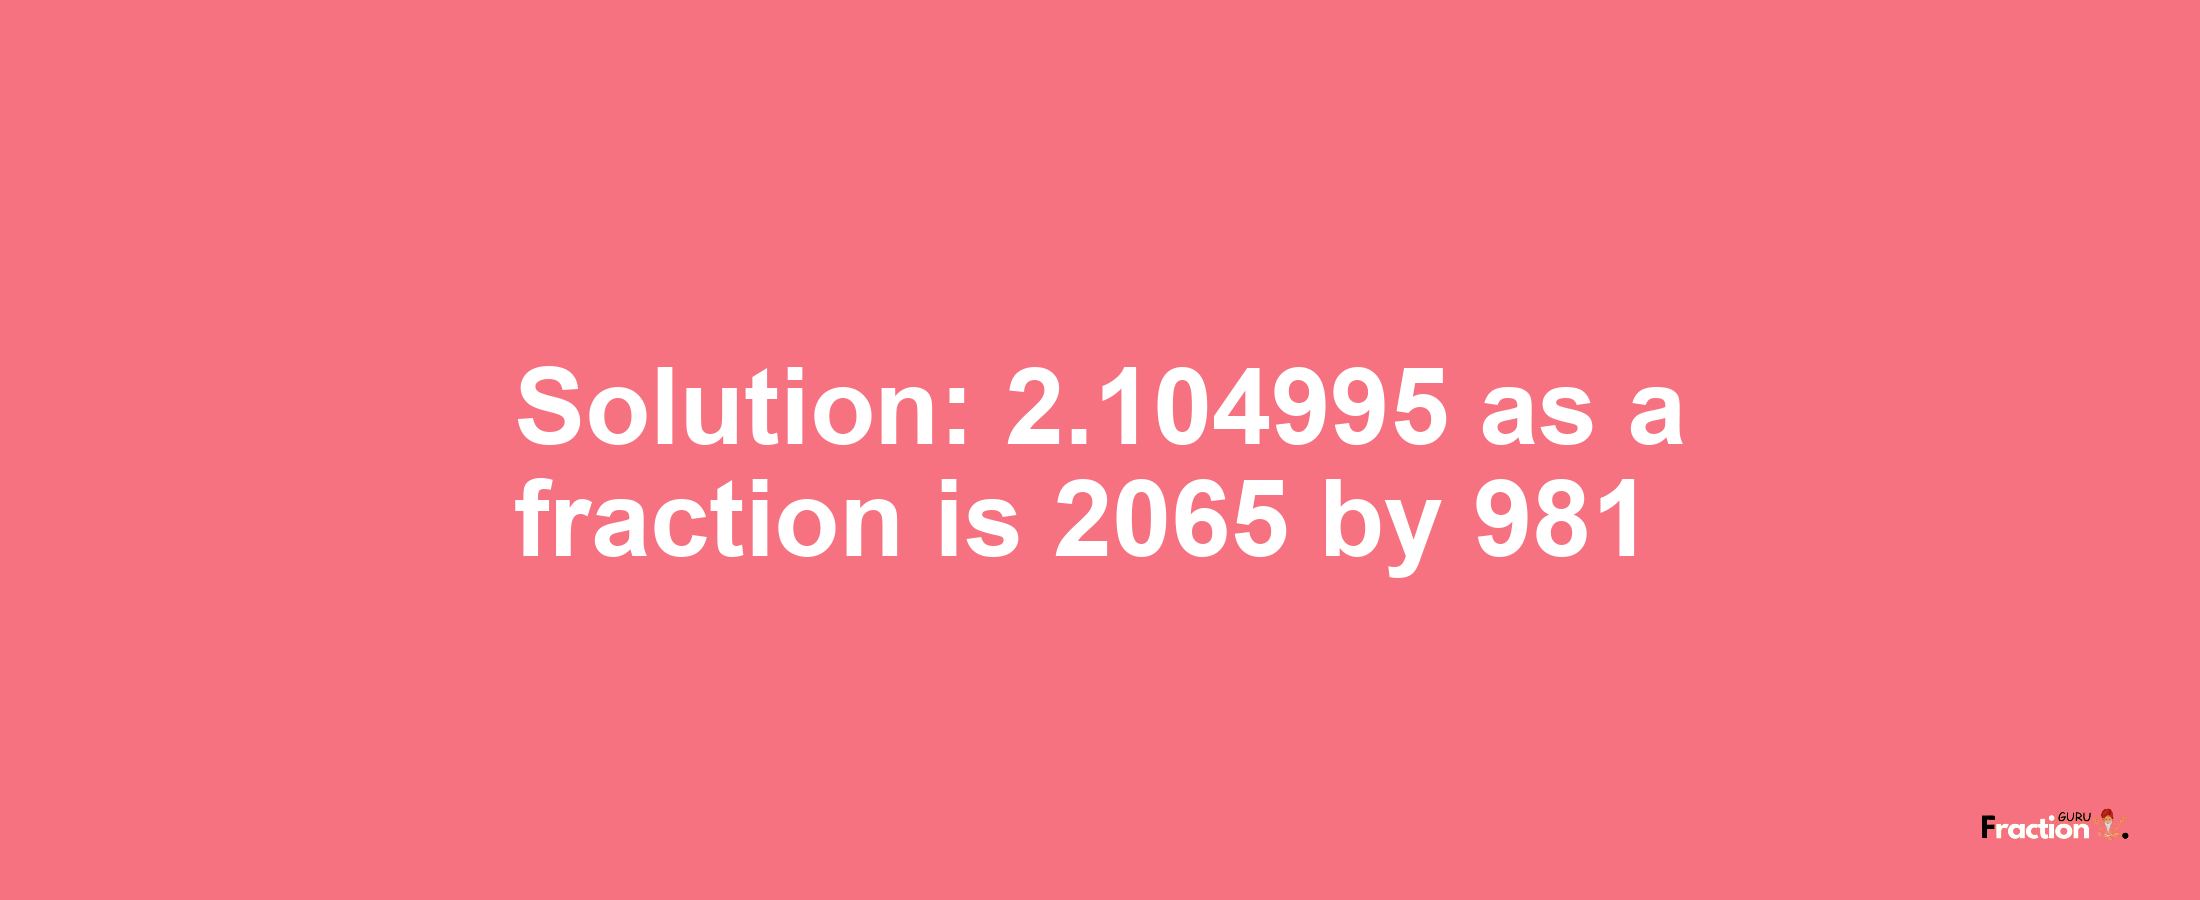 Solution:2.104995 as a fraction is 2065/981